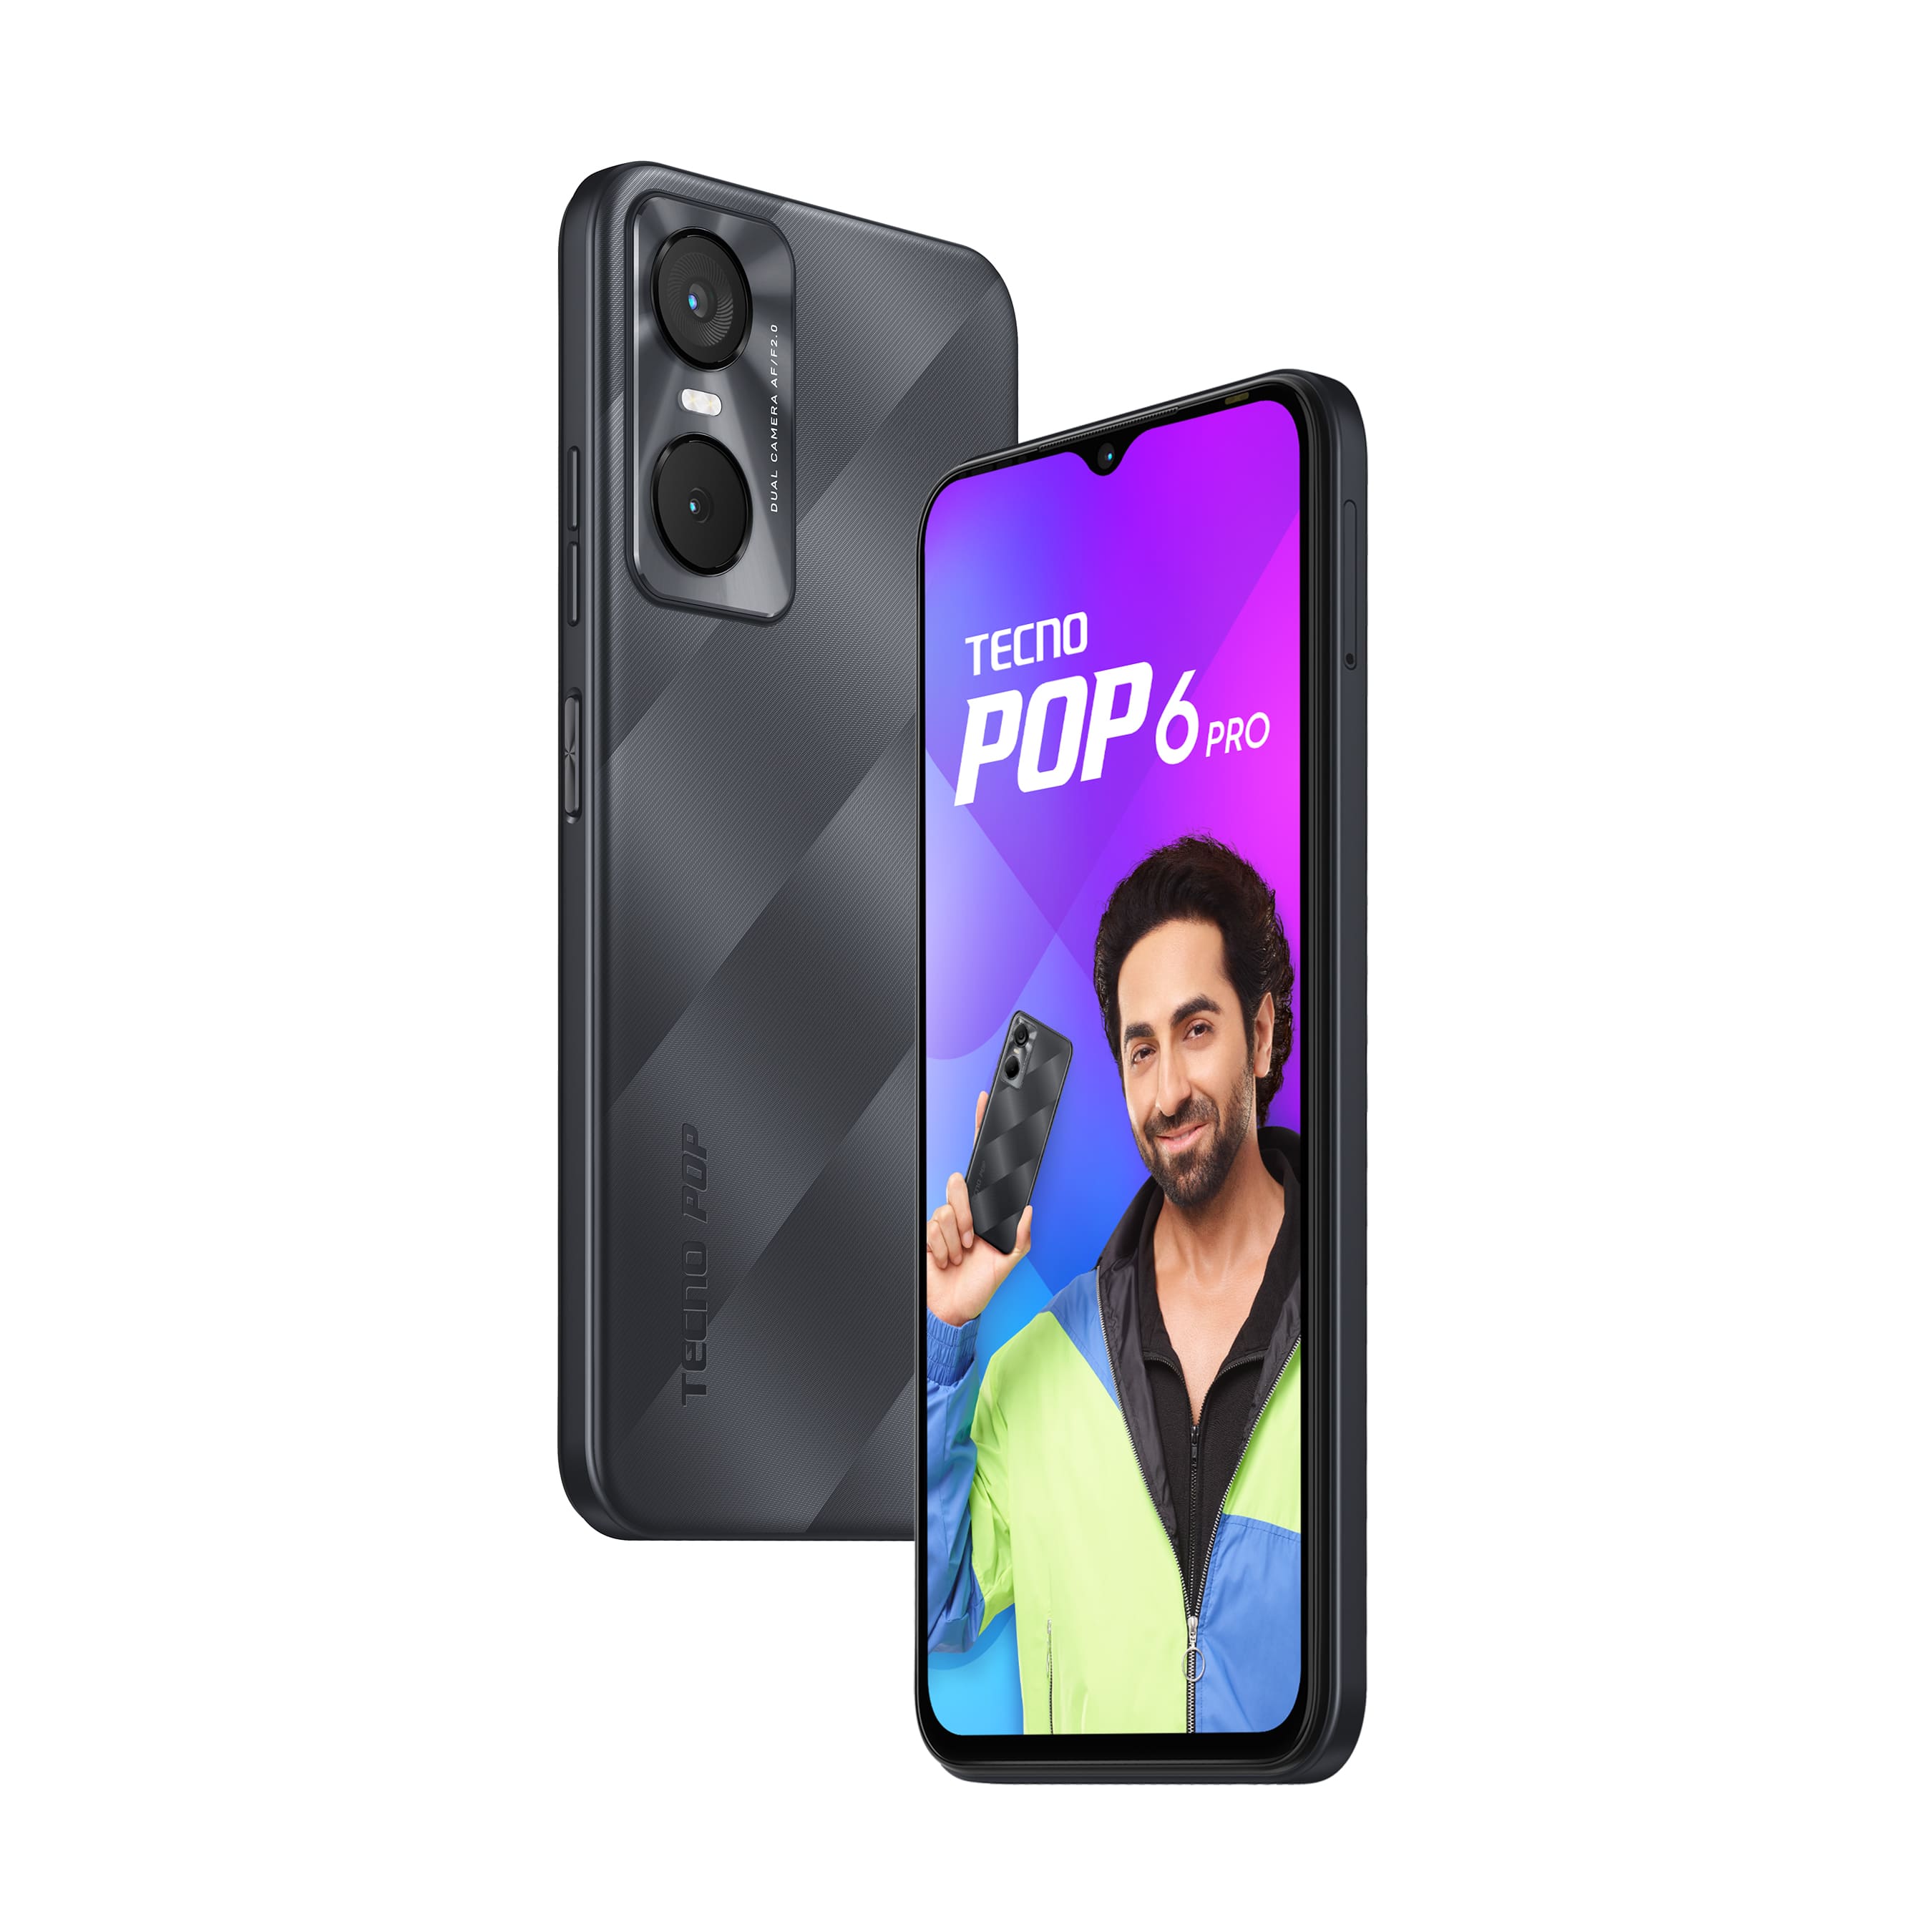 tecno-pop-6-pro-with-5000mah-battery-goes-on-sale-today-at-the-price-of-inr-6099-during-the-ongoing-amazon-great-indian-festival-sale